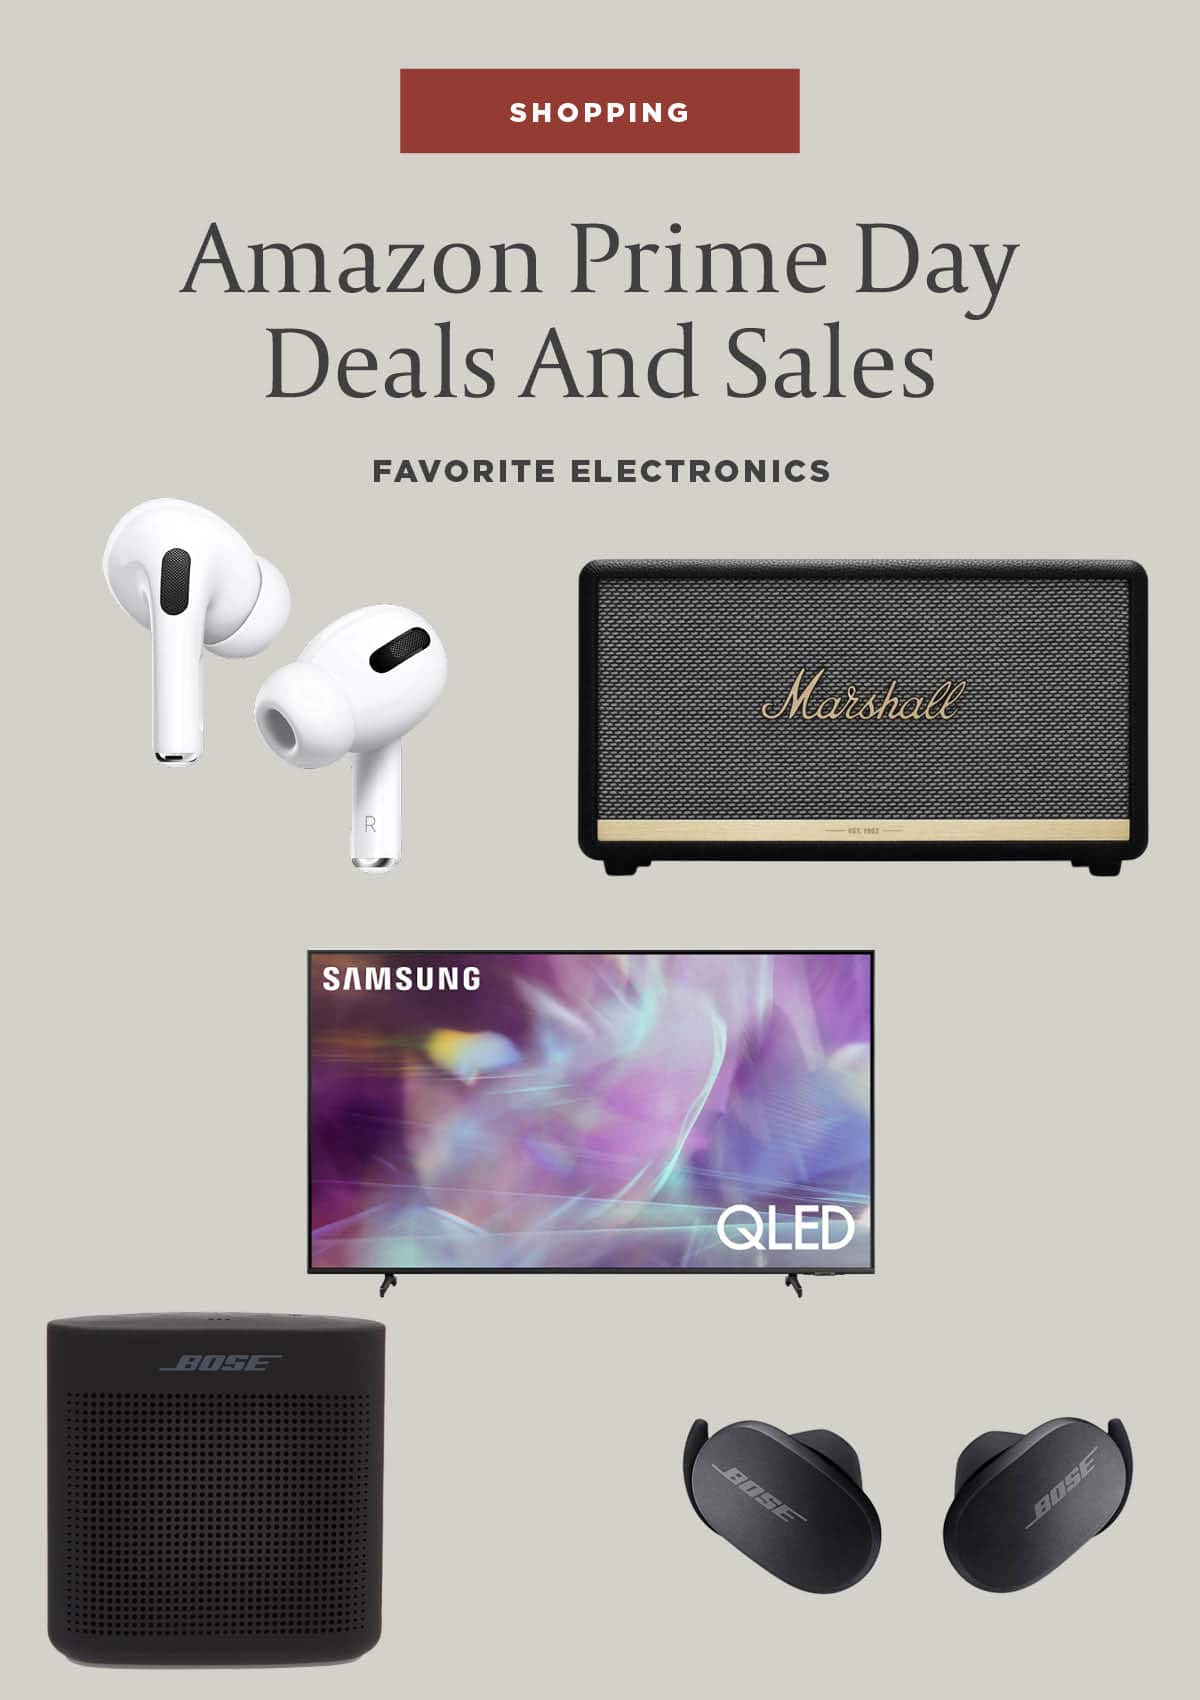 Amazon Prime Day deals - shop these favorite electronics like Apple noise canceling ear pods, bluetooth speaker, and the art tv every interior design loves to decorate with. 